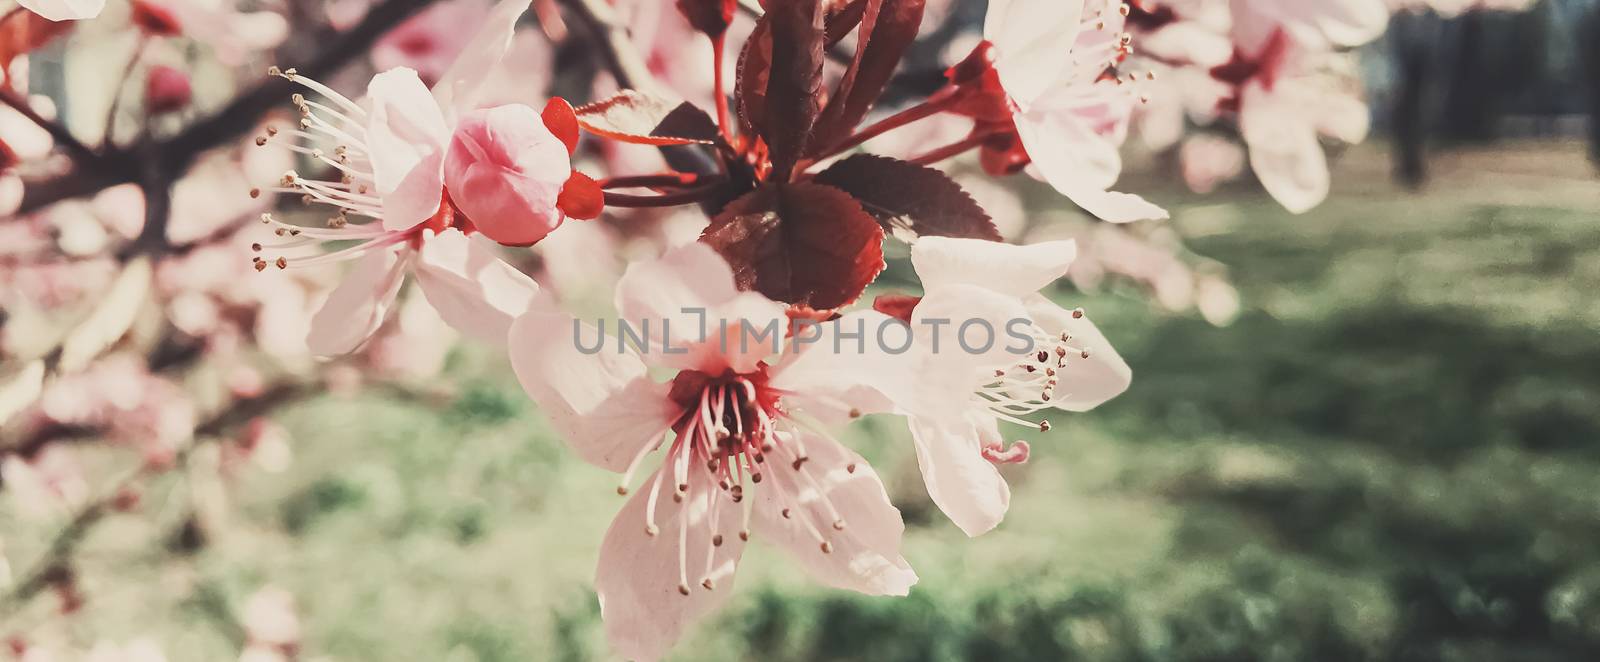 Vintage background of apple tree flowers bloom, floral blossom in sunny spring